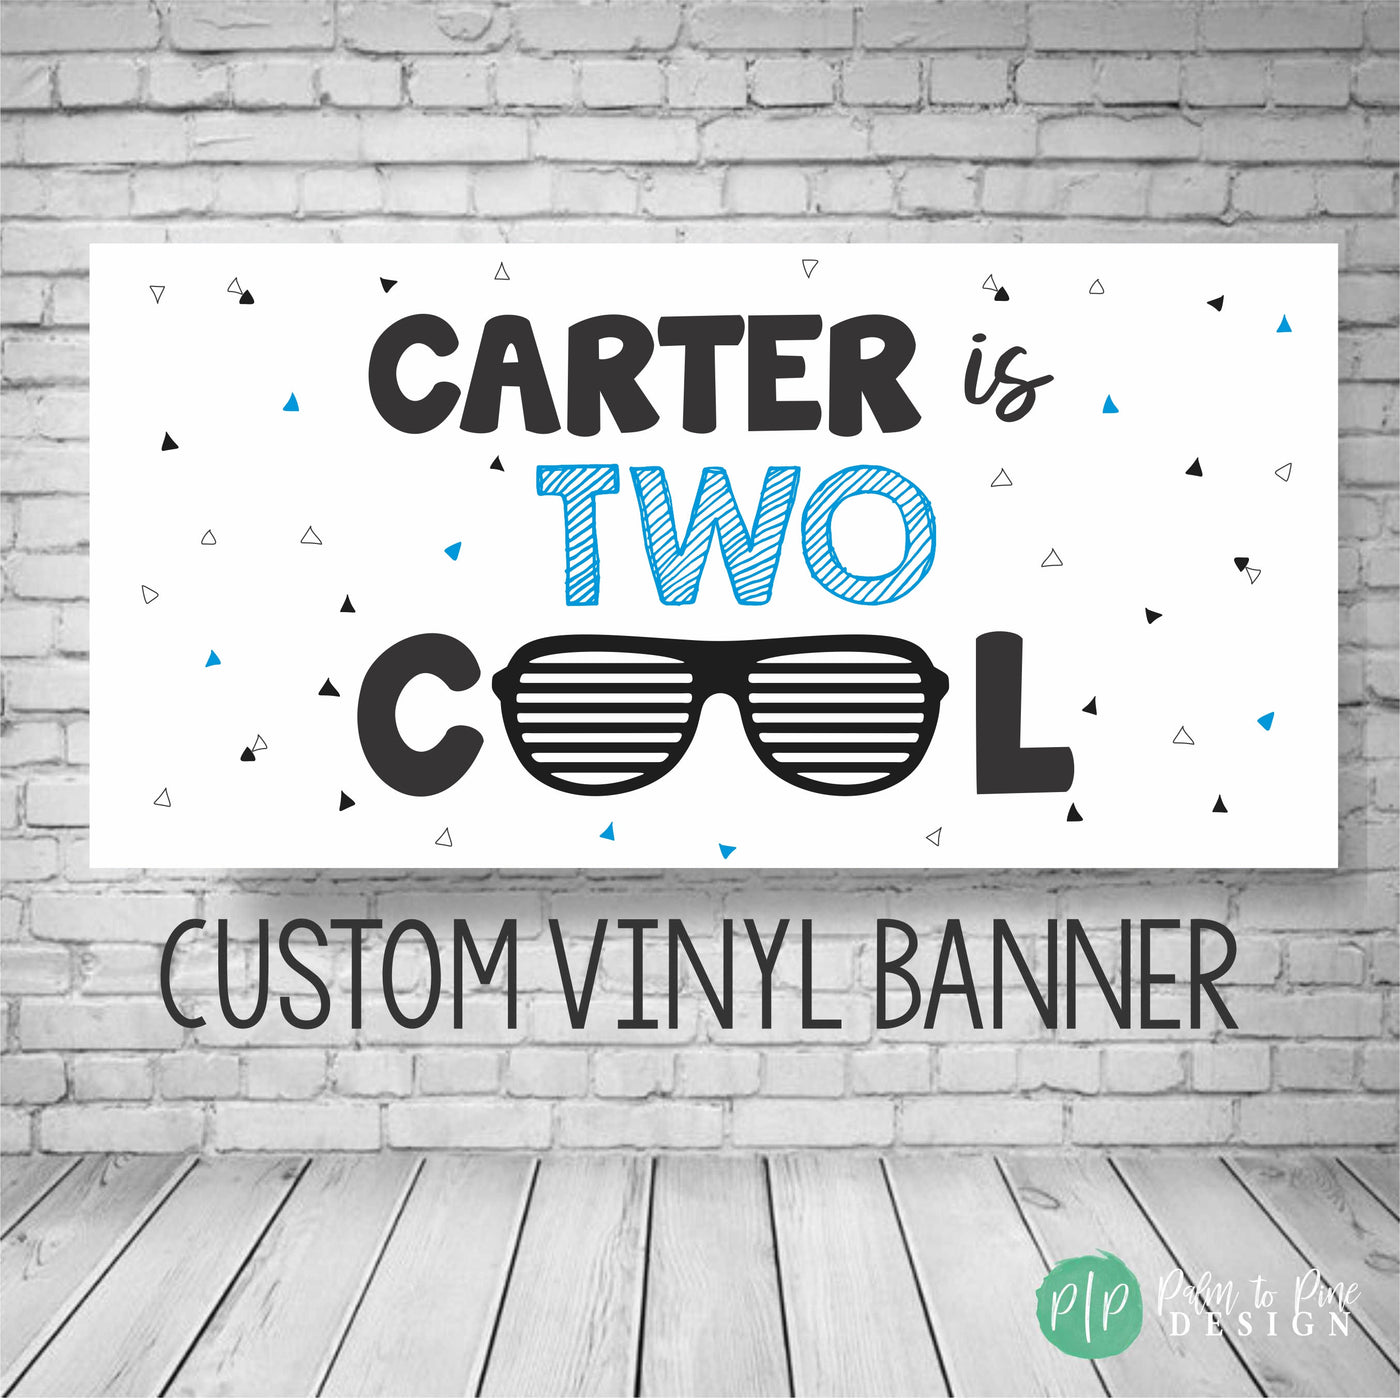 One cool dude birthday banner, 1 cool dude banner, first birthday banner boy, Two cool banner, two cool birthday decor, 2 cool birthday, 1st